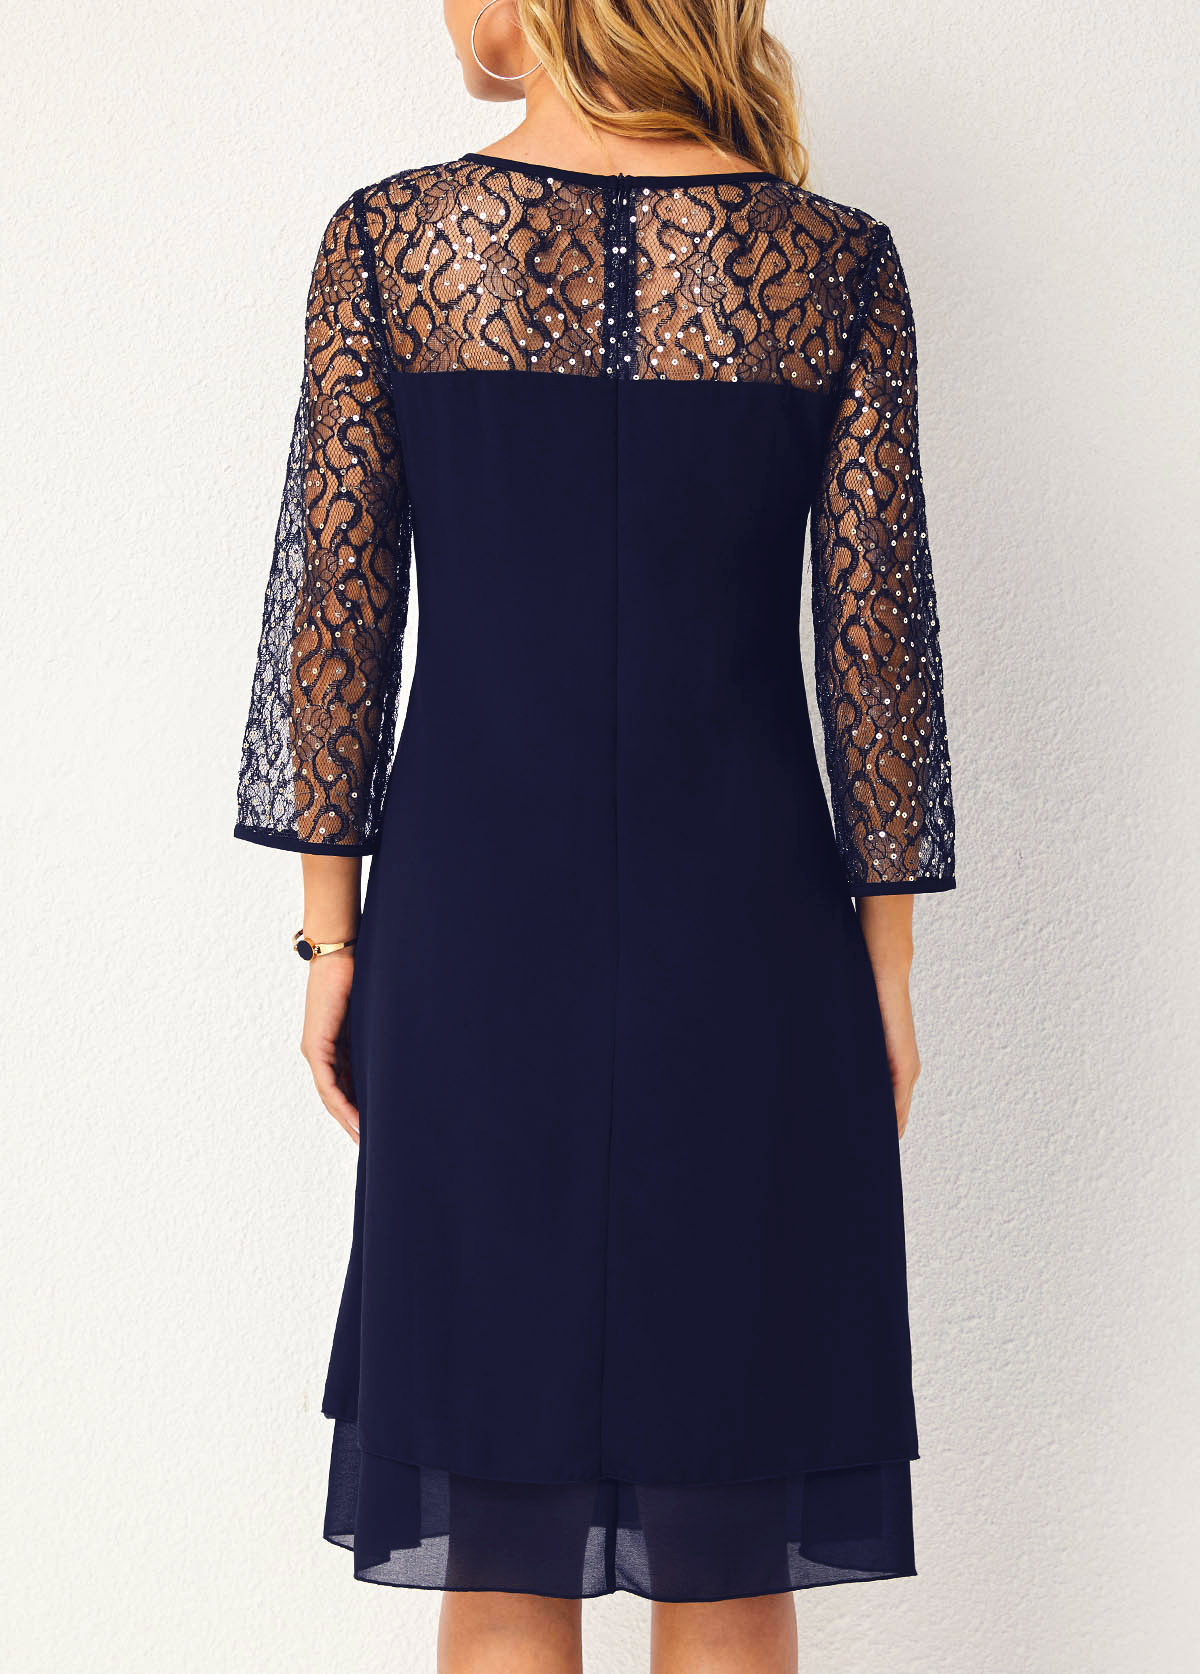 Lace Stitching Navy Blue Sequin Dress